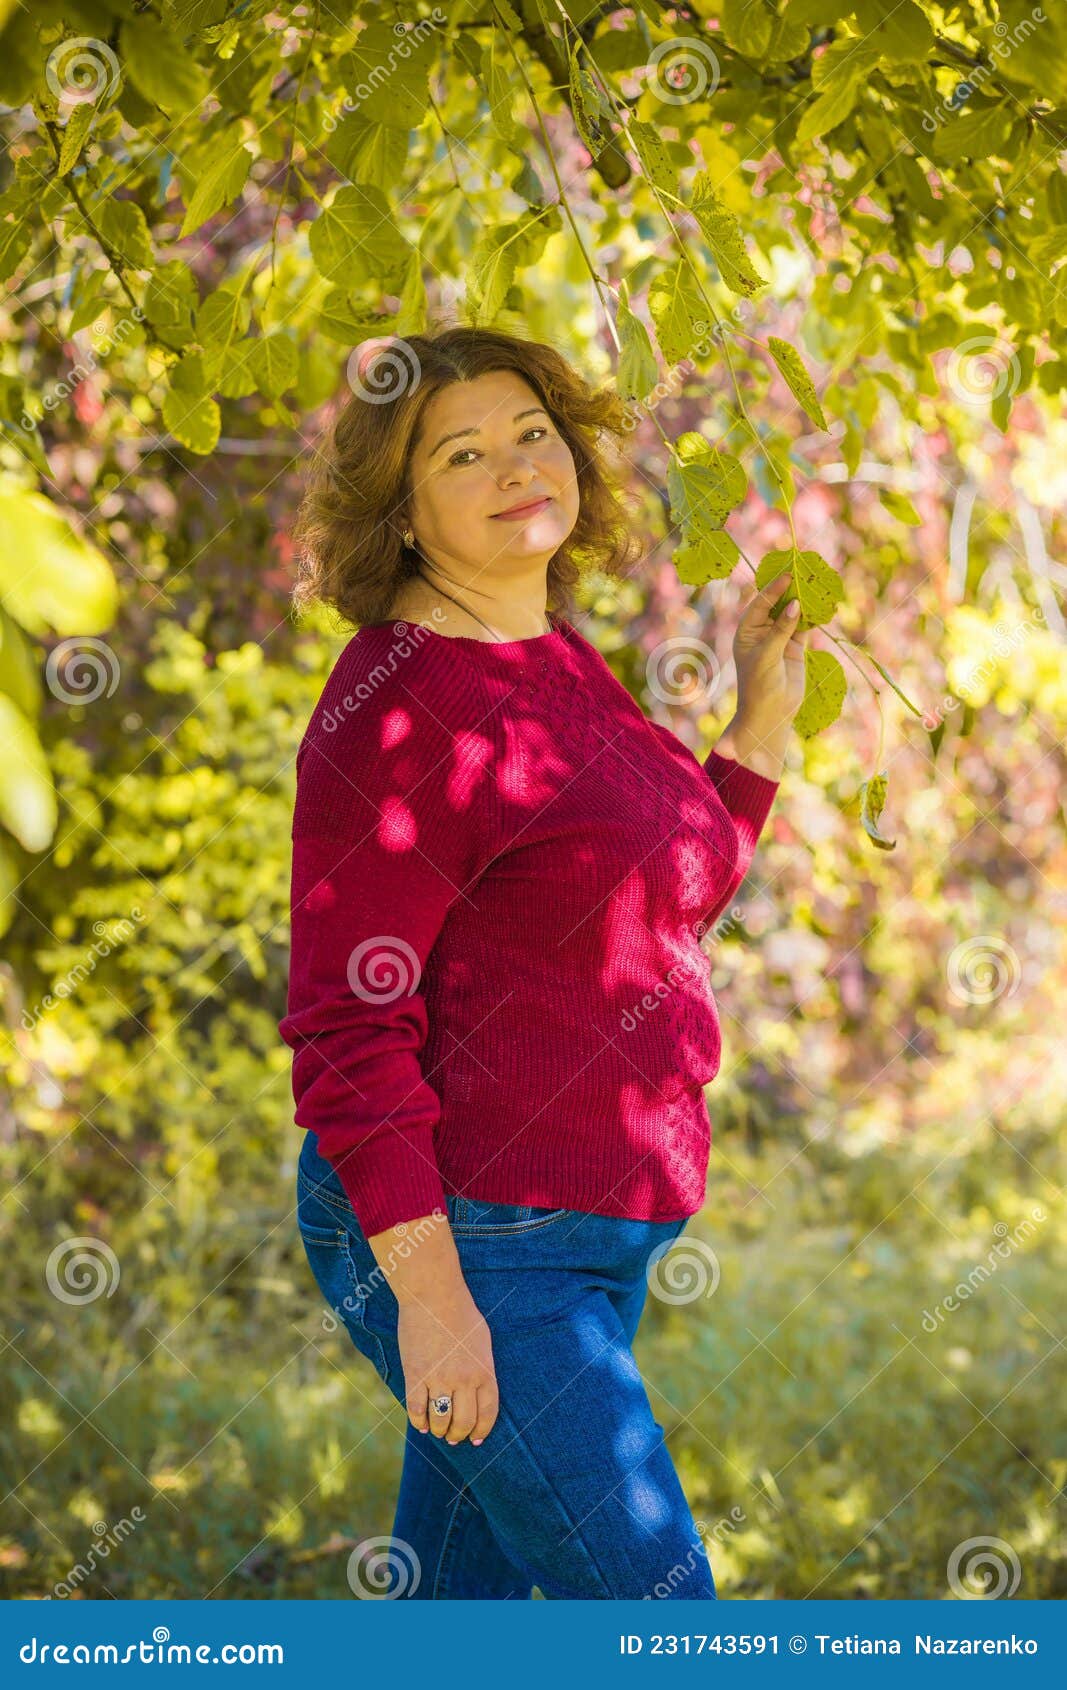 European Plus Size Woman at Nature, Fashion for Ladies Stock Image - Image  of lifestyle, mature: 231743591